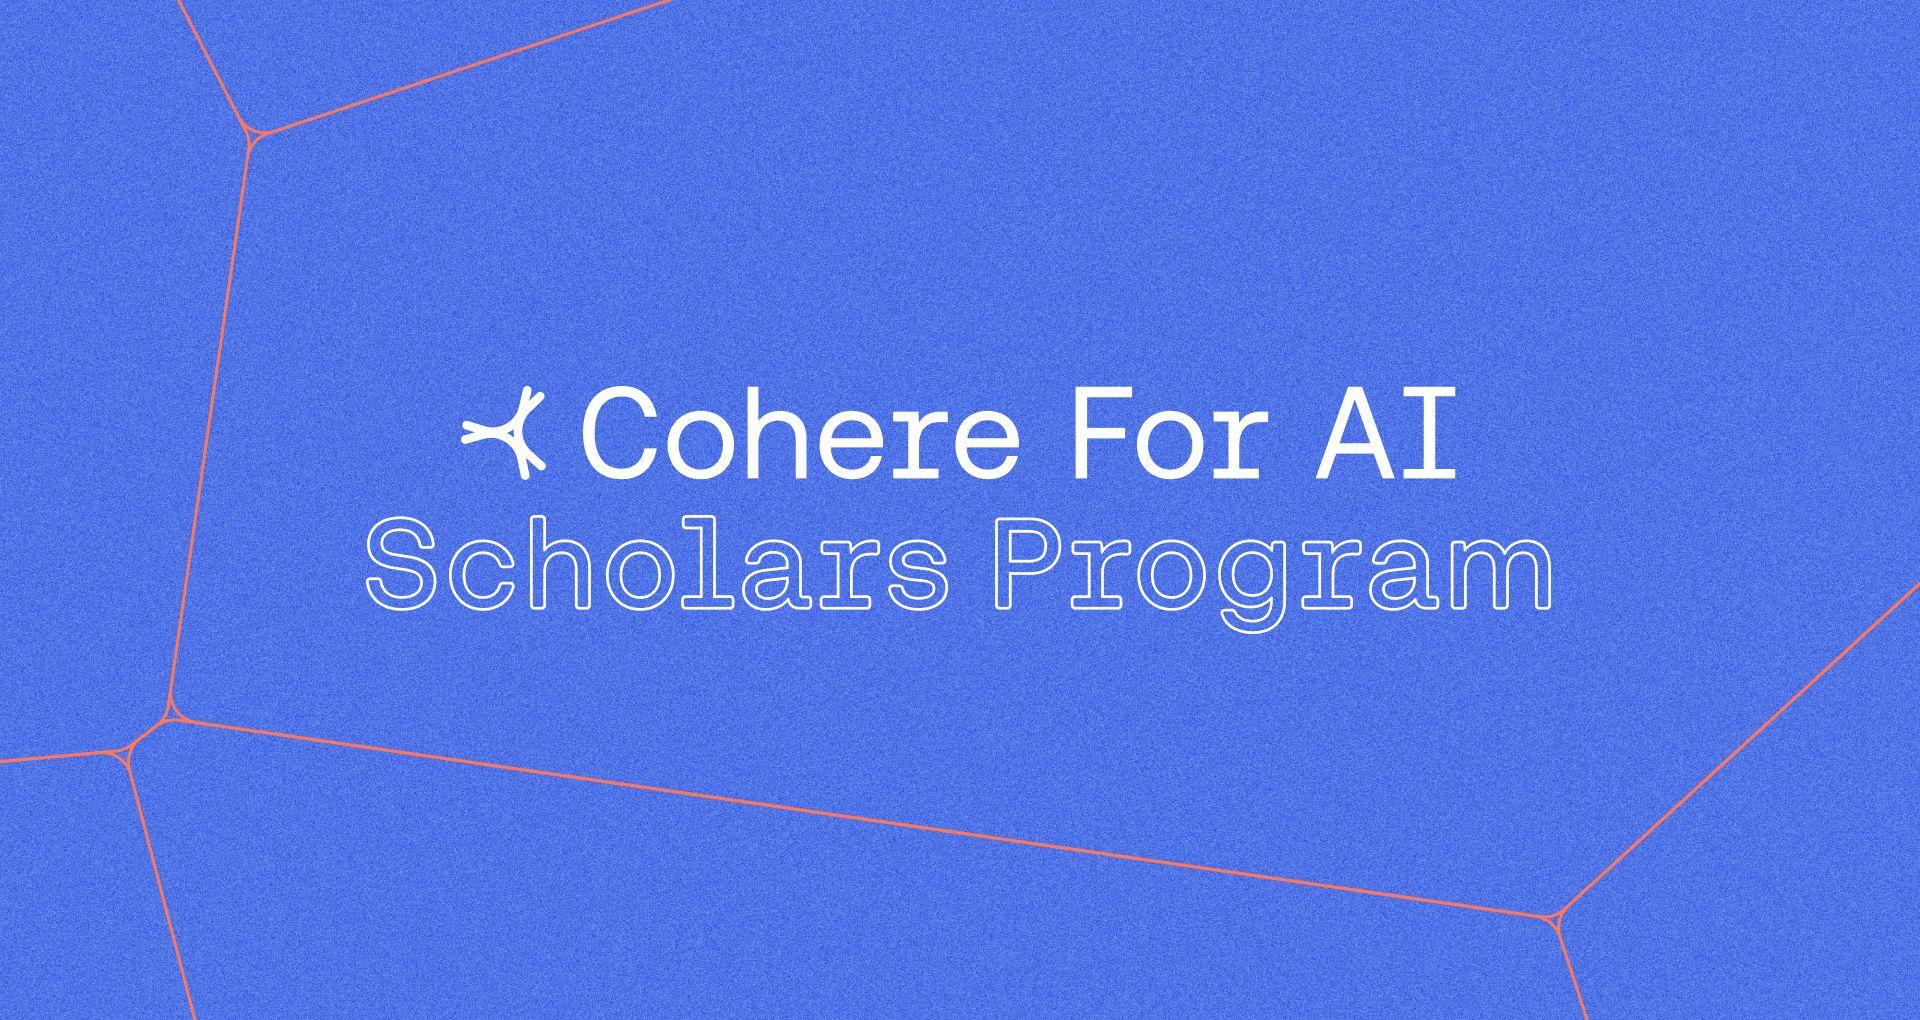 Introducing the Cohere For AI Scholars Program: Your Research Journey Starts Here